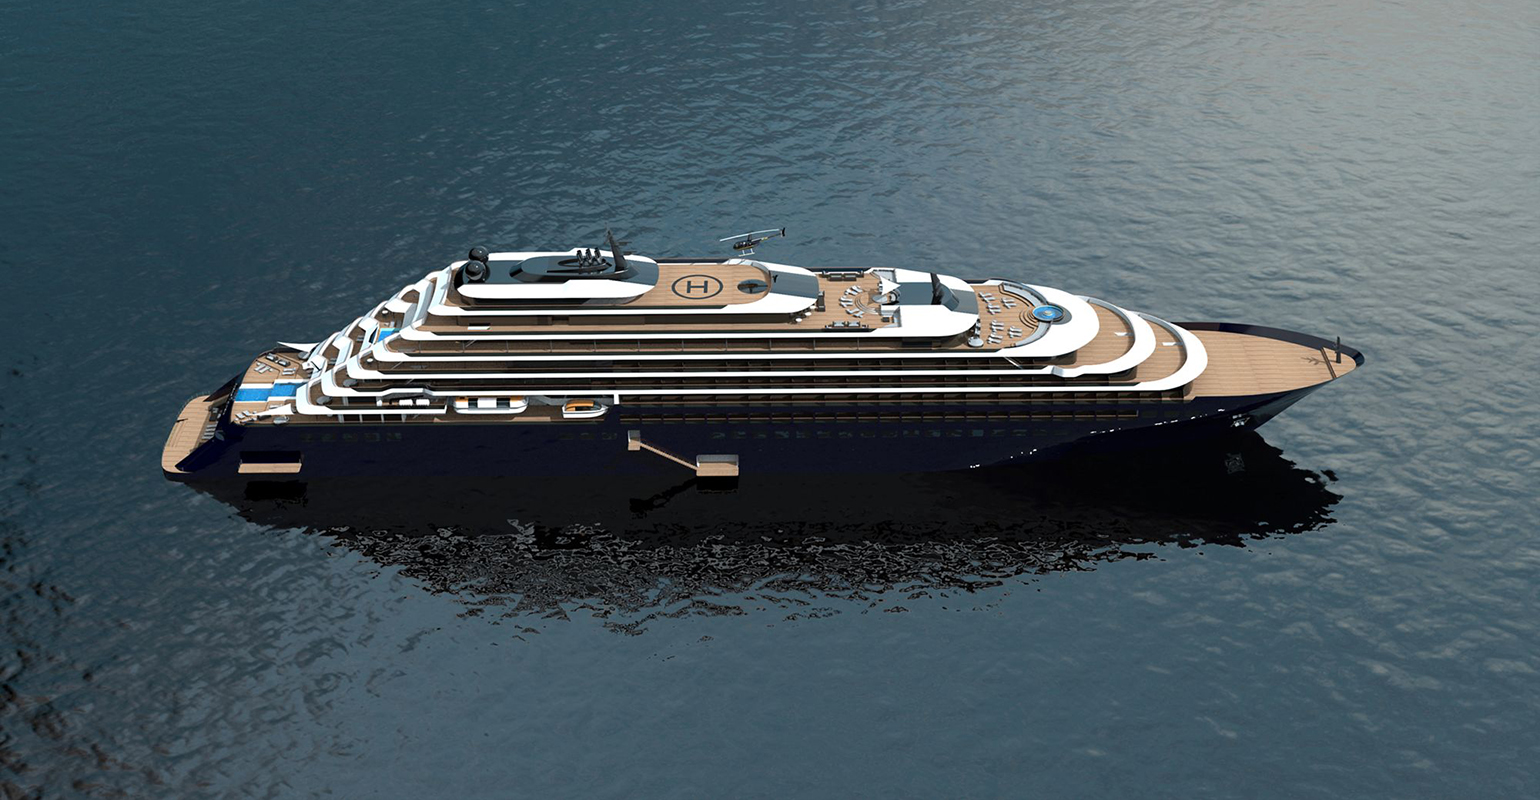 Ritz-Carlton's new superyacht brings five-star luxury to the sea